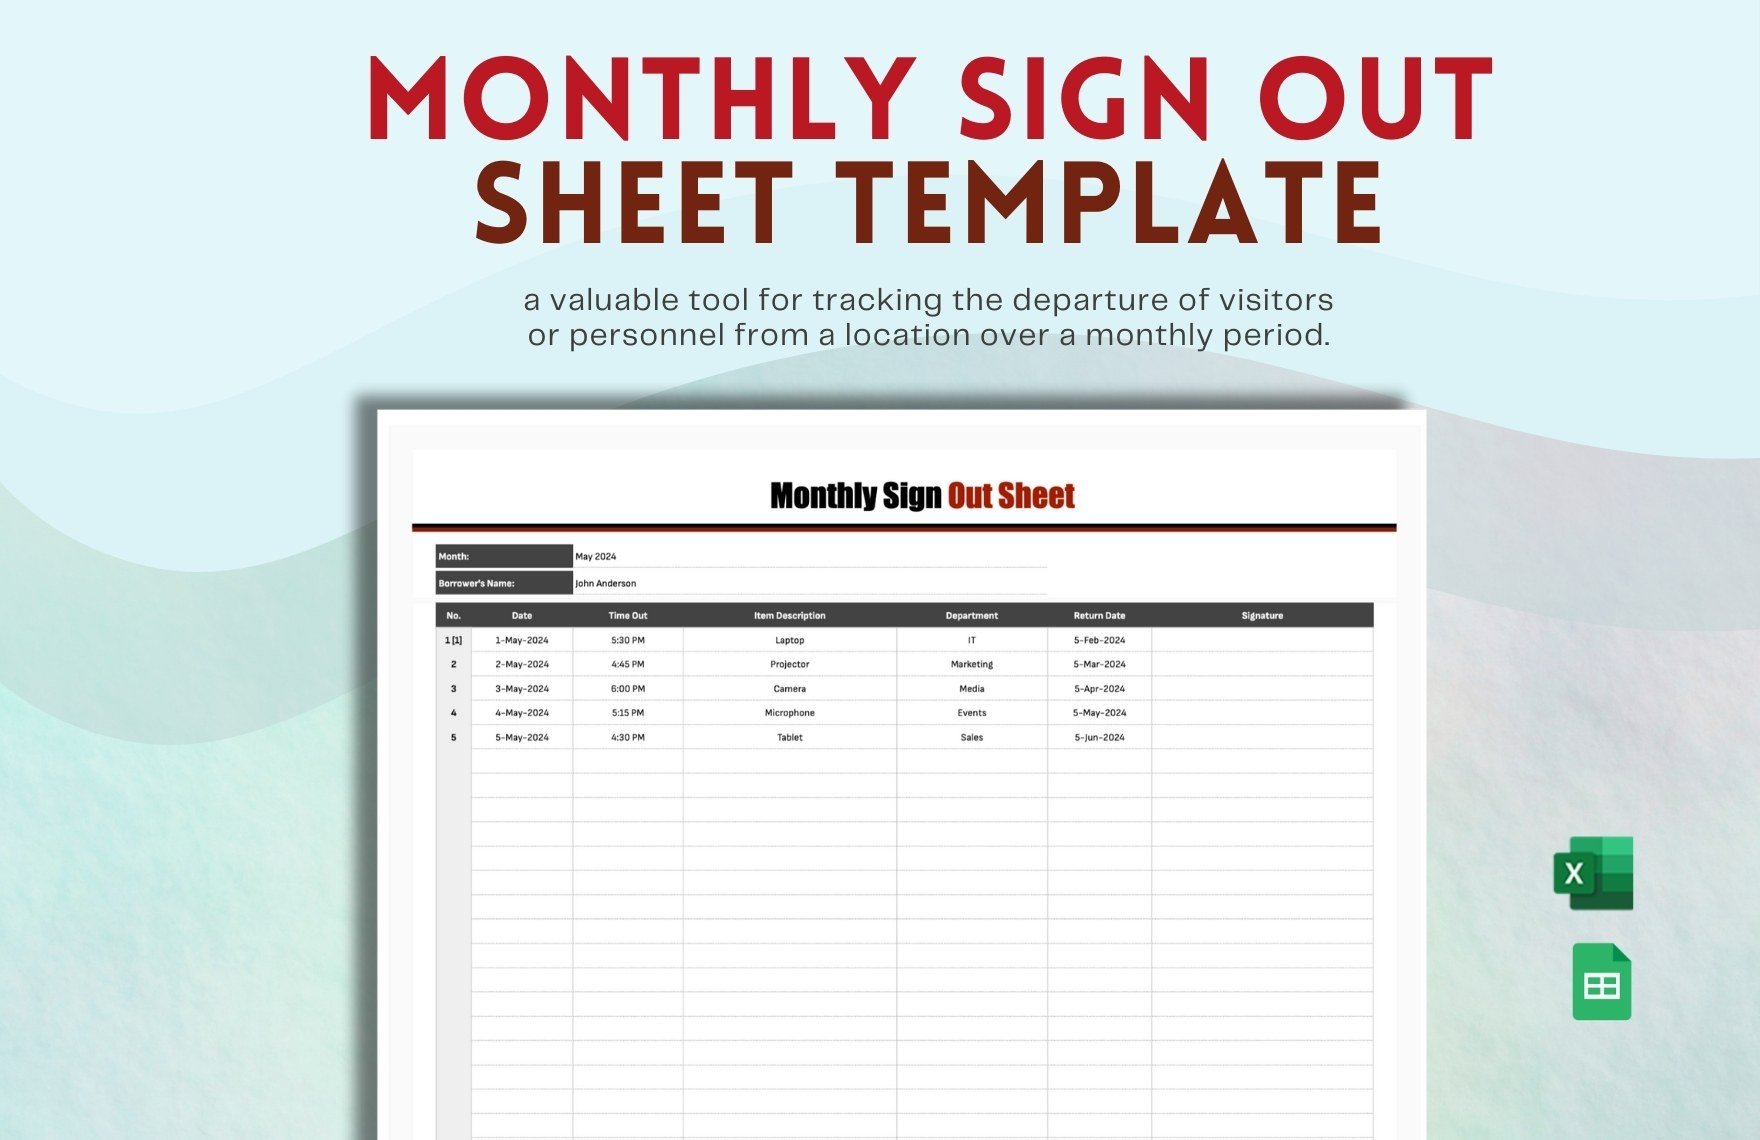 Monthly Sign Out Sheet Template in Excel, Google Sheets